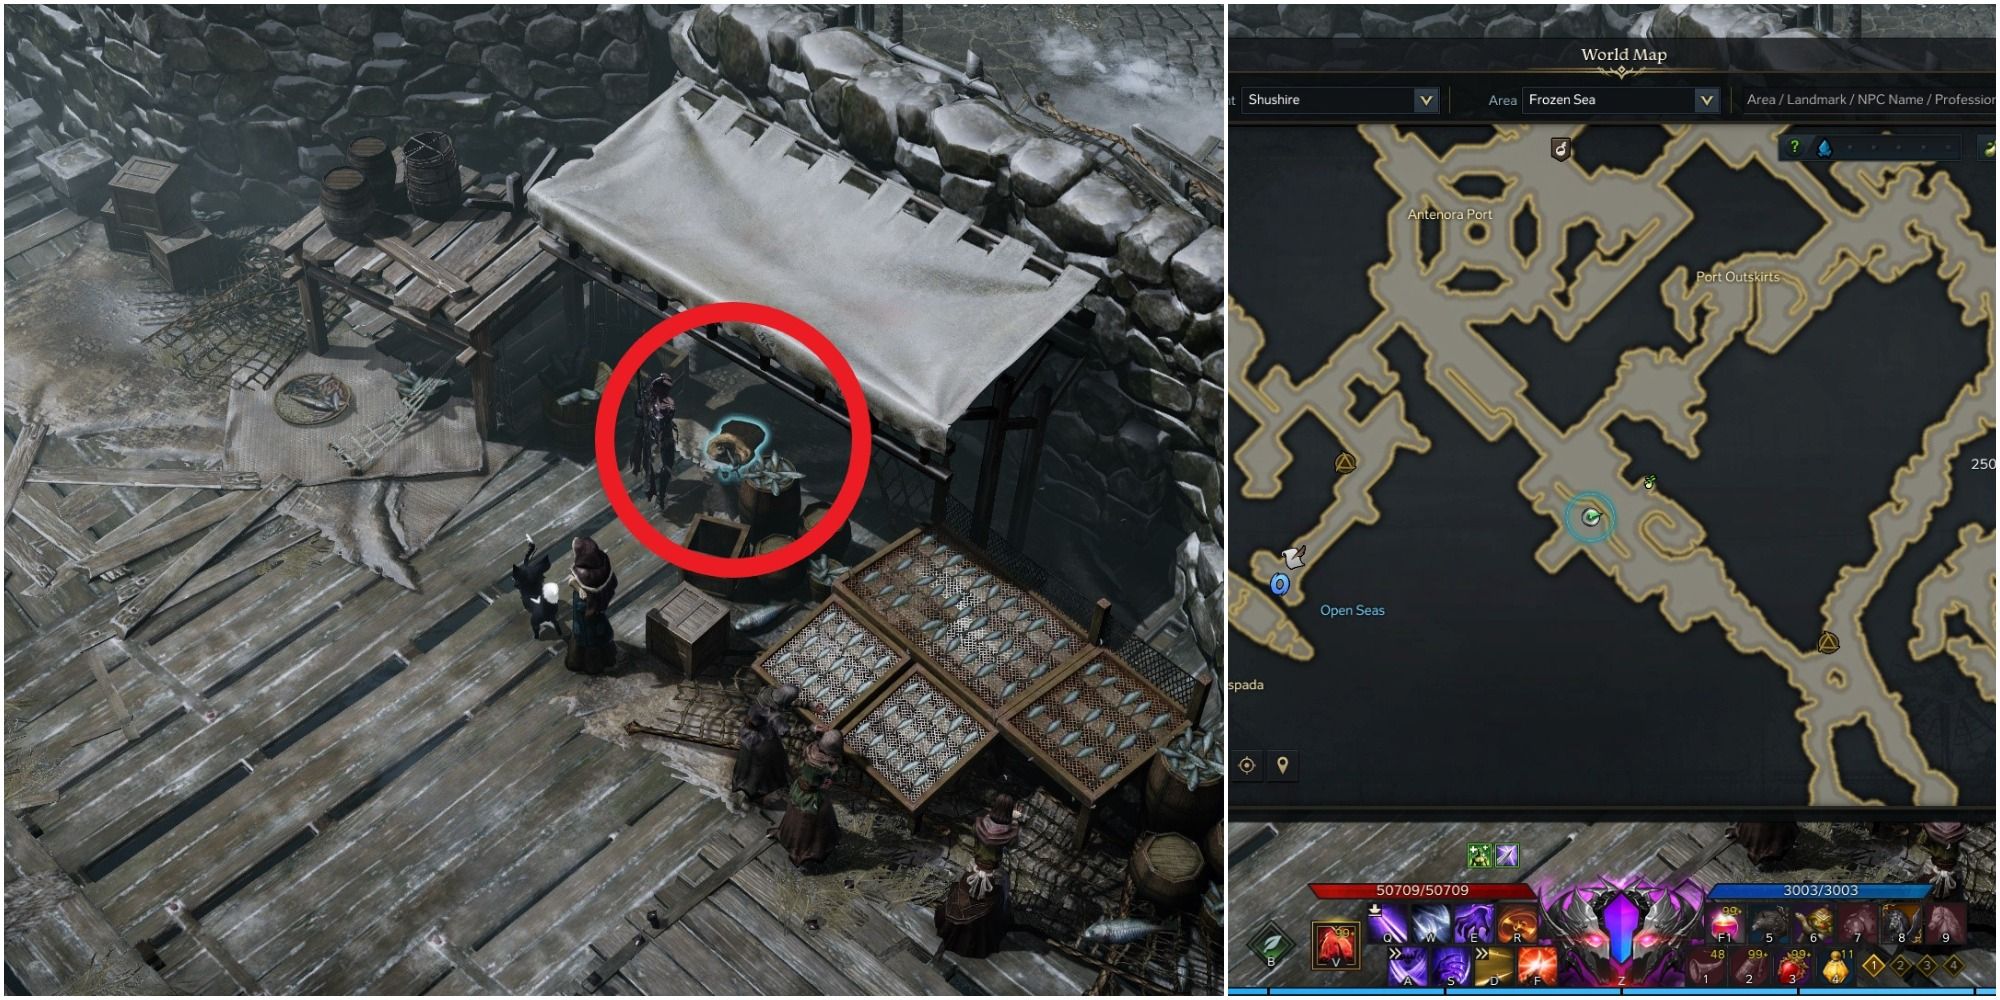 Lost Ark split image of Old Canned Food location on the map and its location on the ground with a red circle around a bag under a tent